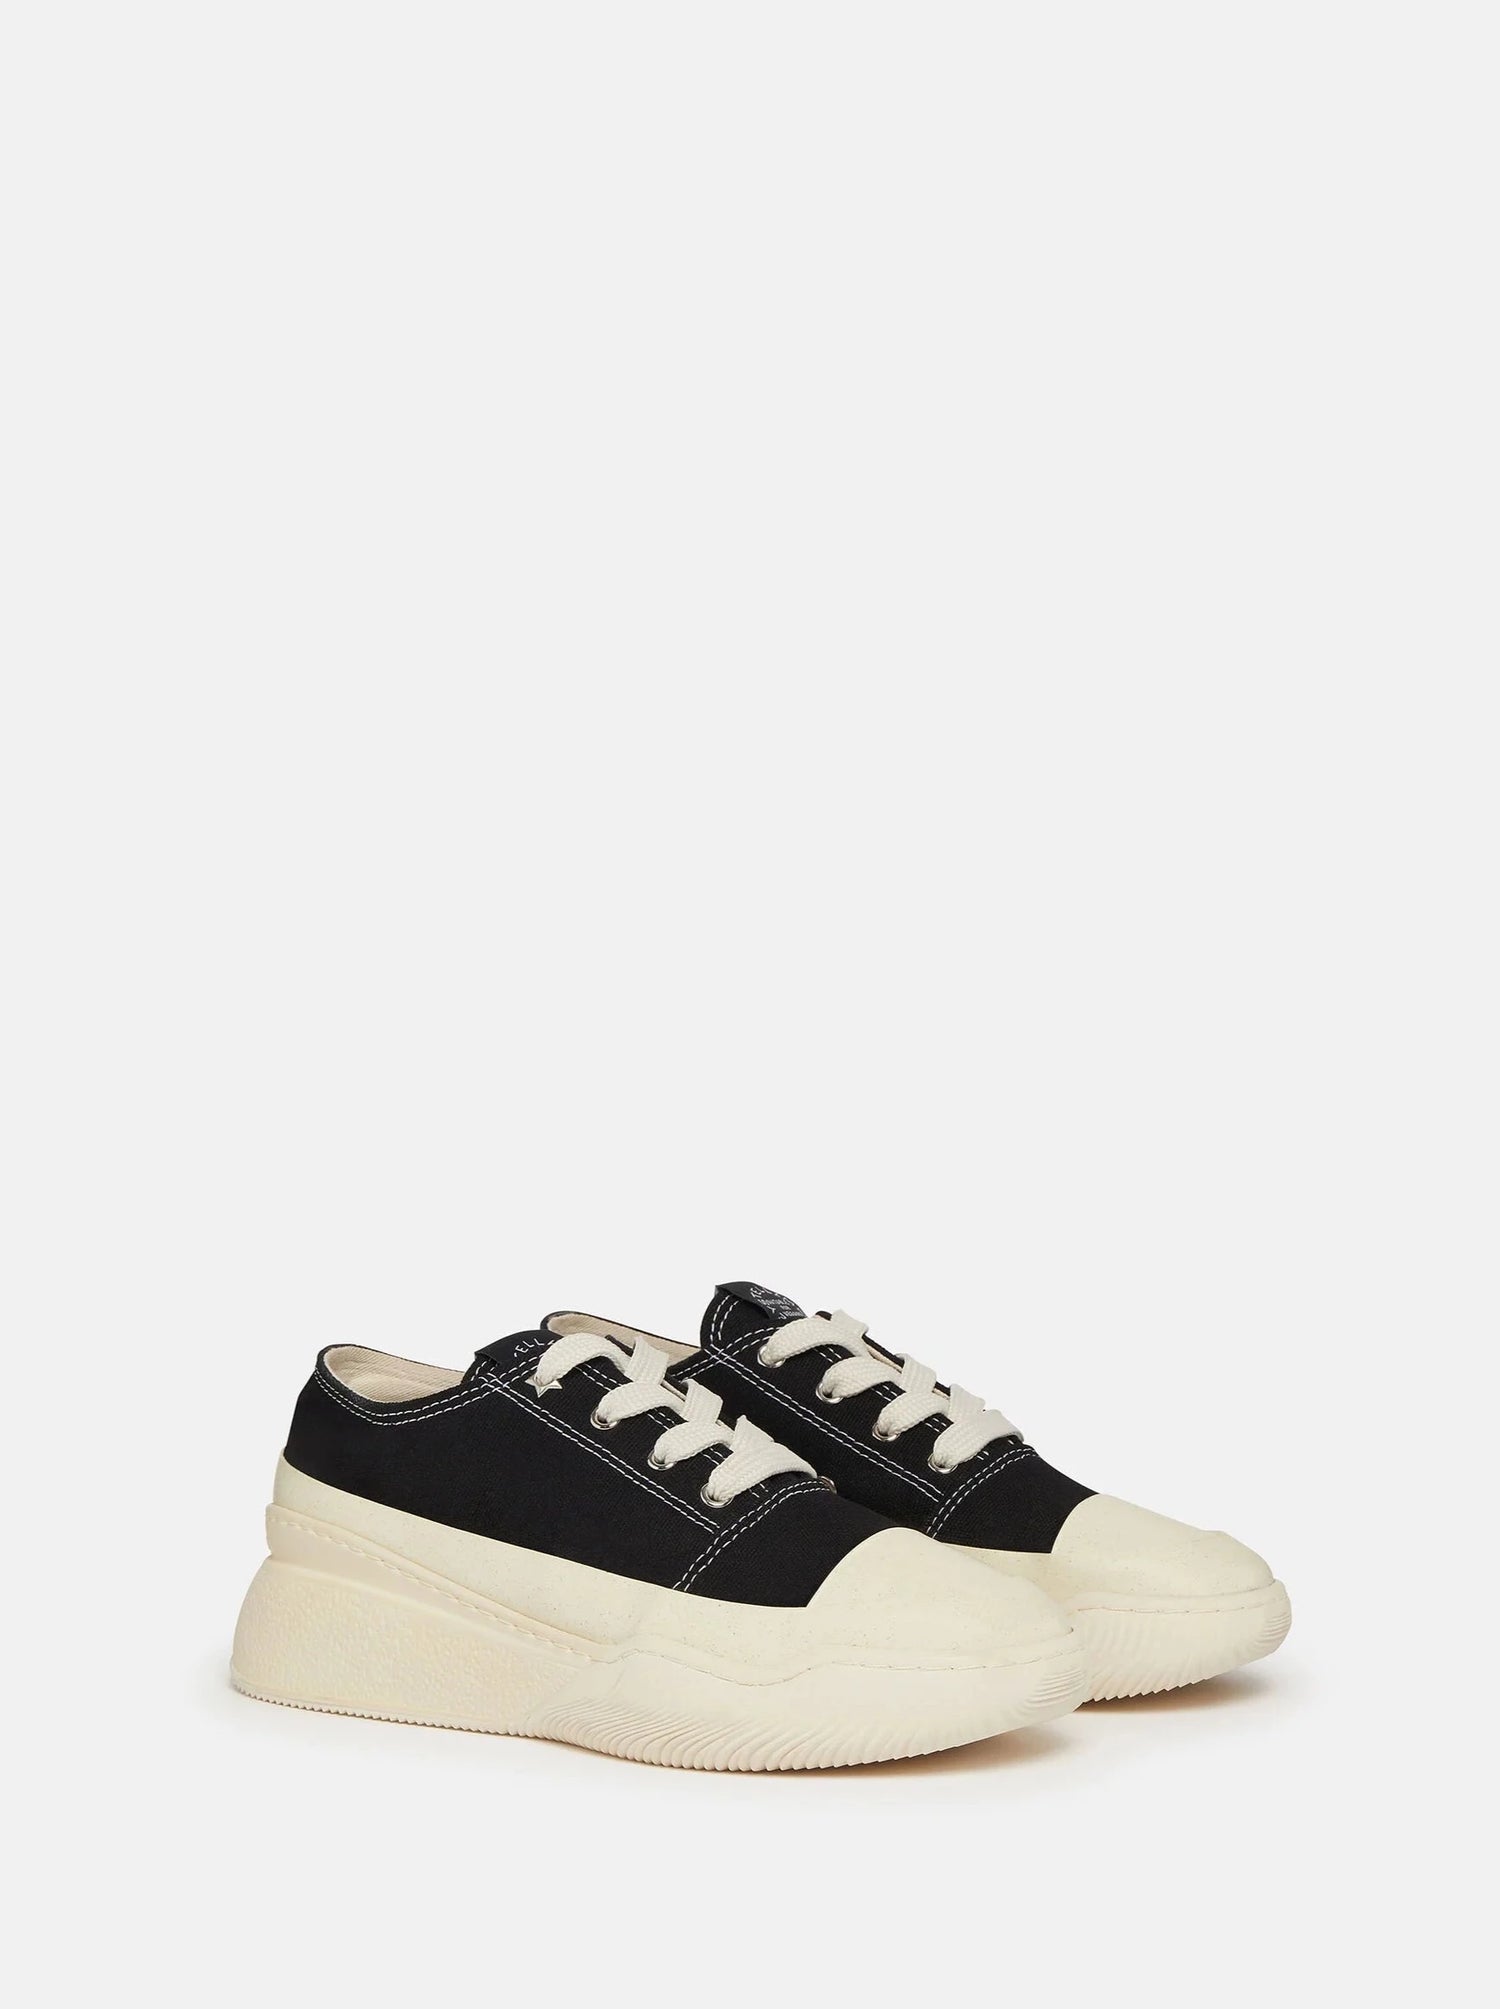 Loop Recycled Cotton sneakers, black/white